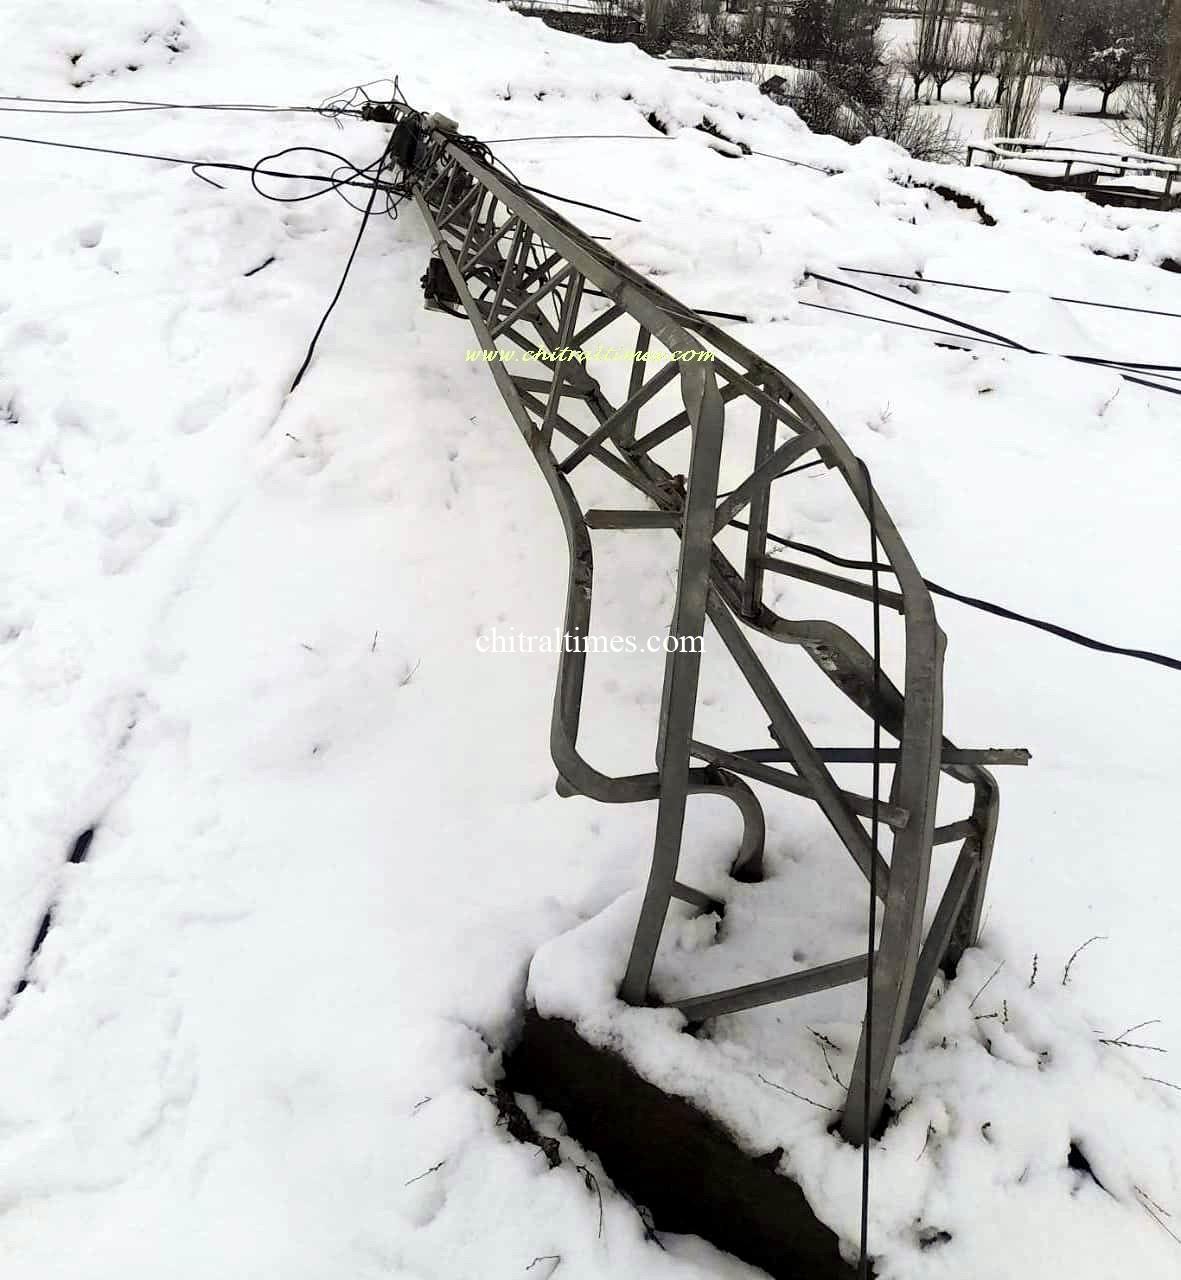 chitraltimes electric pol collapsed due to heavy snowfall in upper chitral parwak